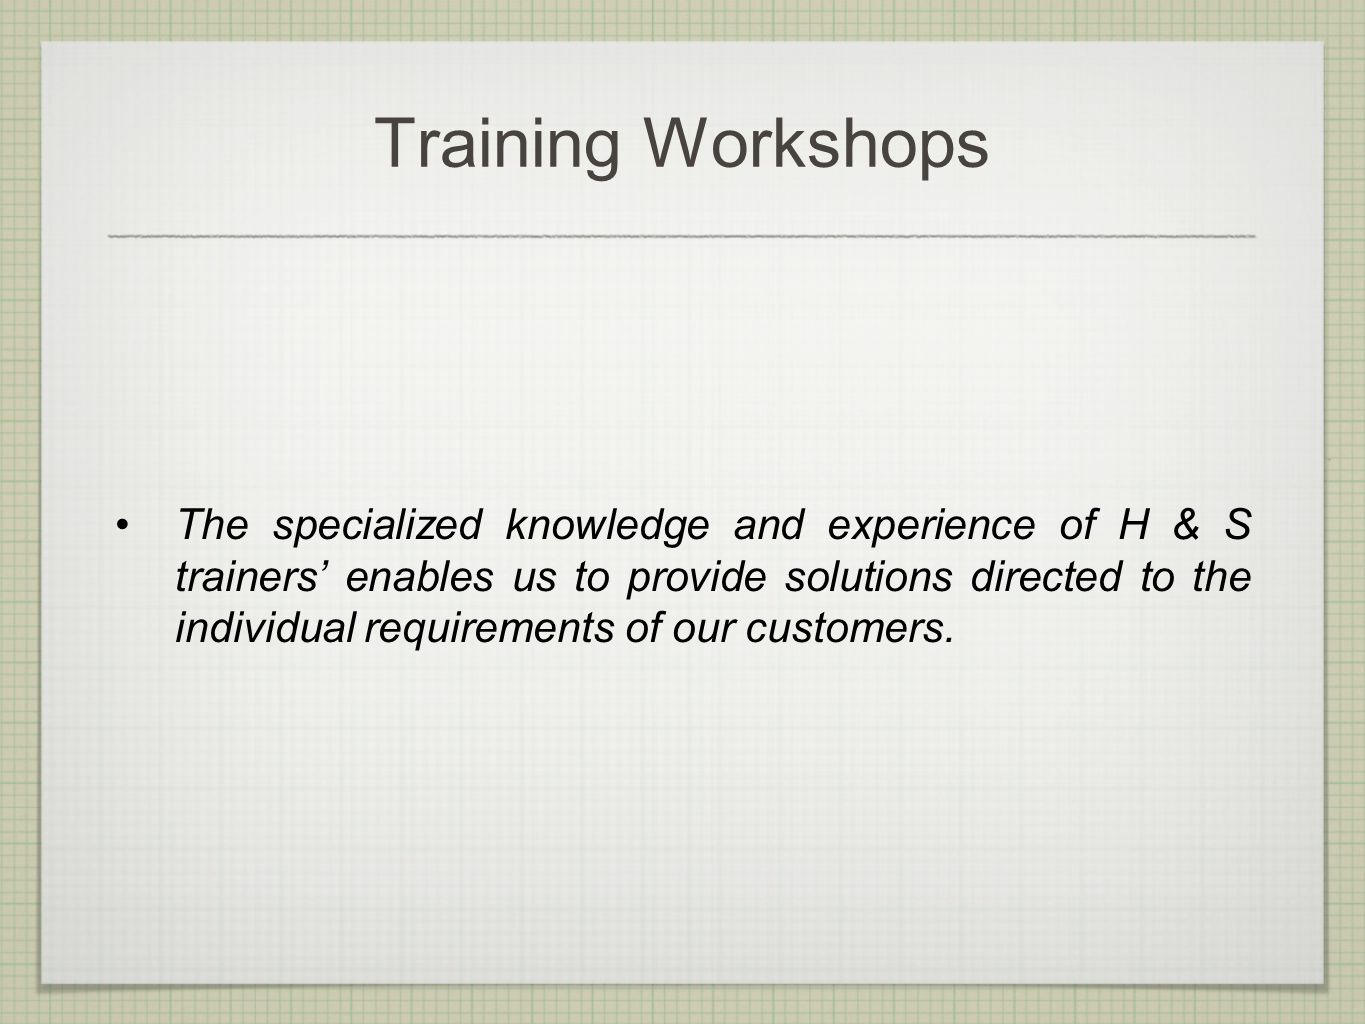 Training Workshops The specialized knowledge and experience of H & S trainers’ enables us to provide solutions directed to the individual requirements of our customers.